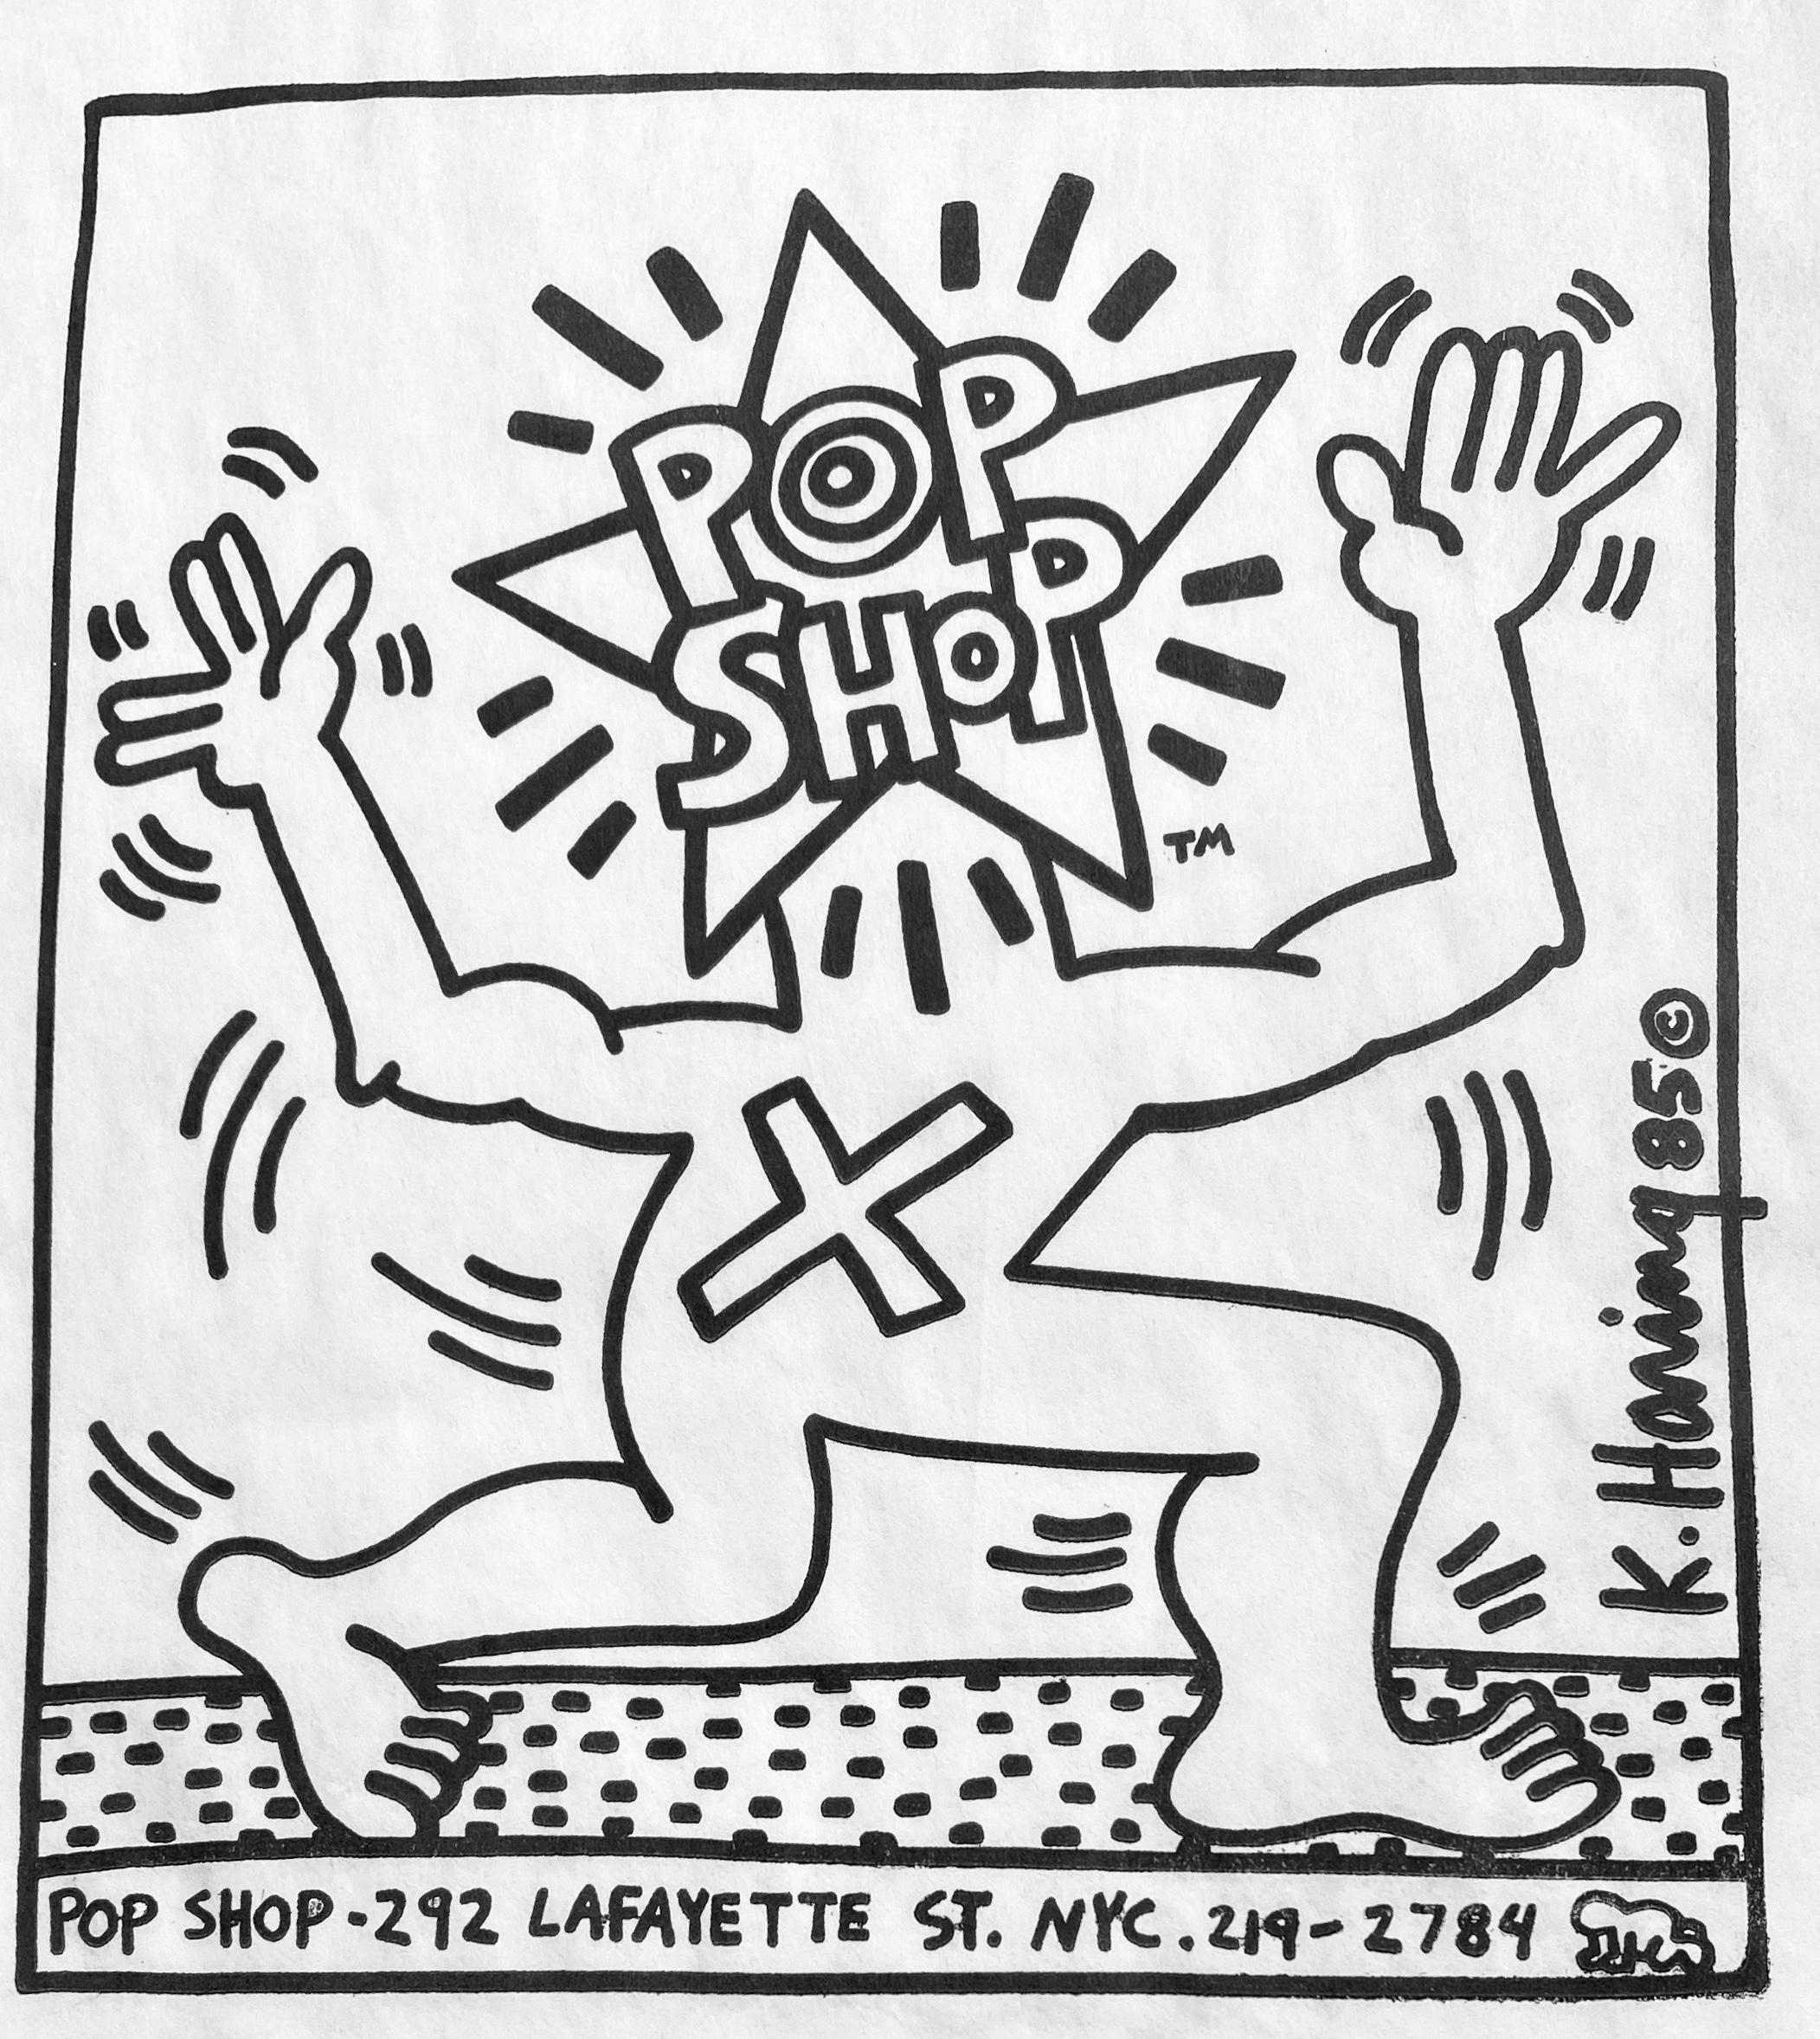 Vintage Keith Haring 1980s Pop Shop bag off-set illustrated by Haring. A classic Haring Pop Shop collectible that is well-suited for framing. 

Medium: Offset lithograph on whiter paper bag. c.1986.
Approximately 8.5 x 11 inches. 
Good to very good